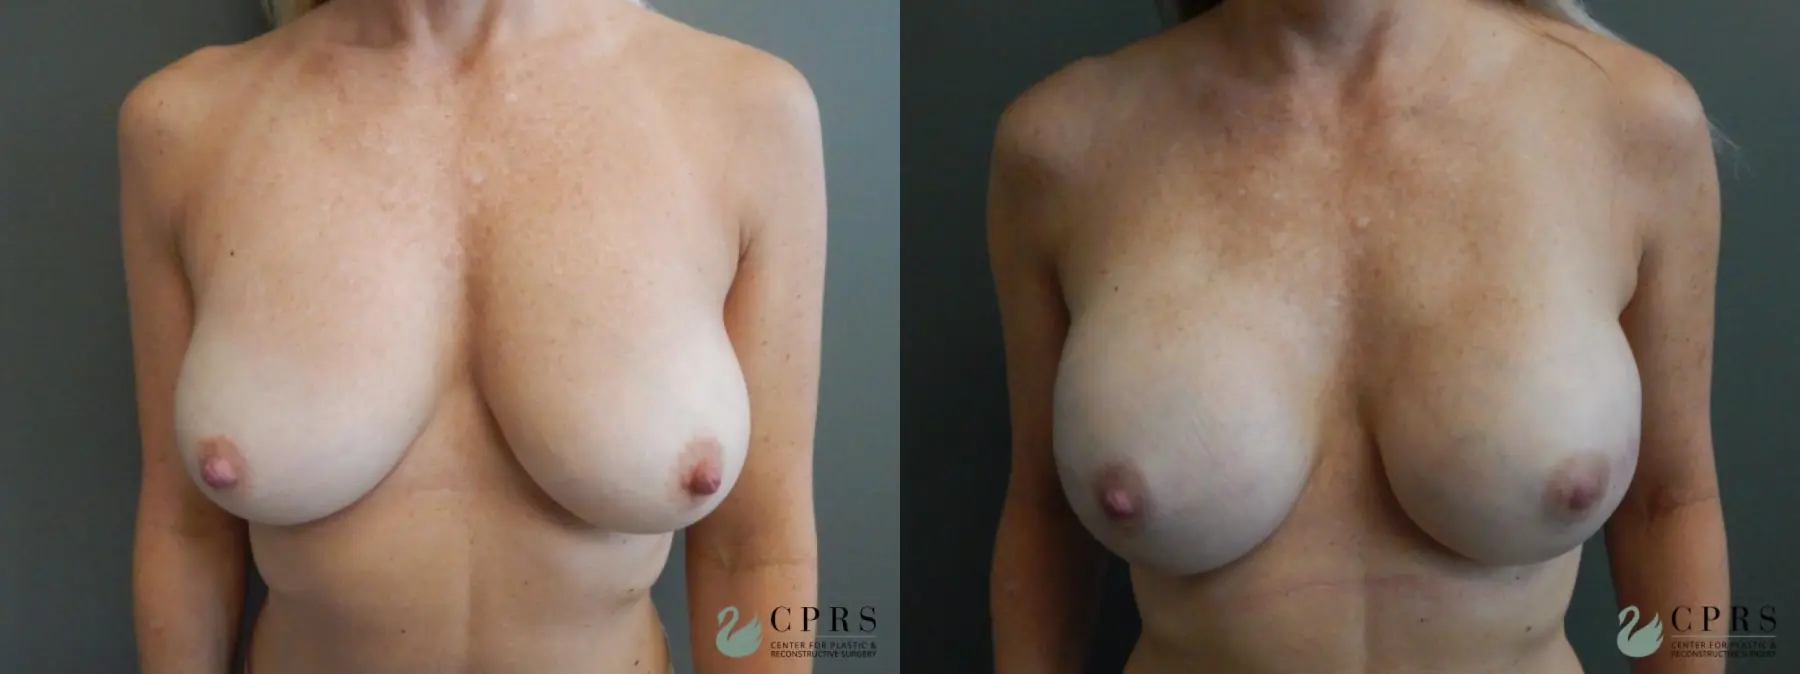 Breast Reconstruction: Patient 3 - Before and After  